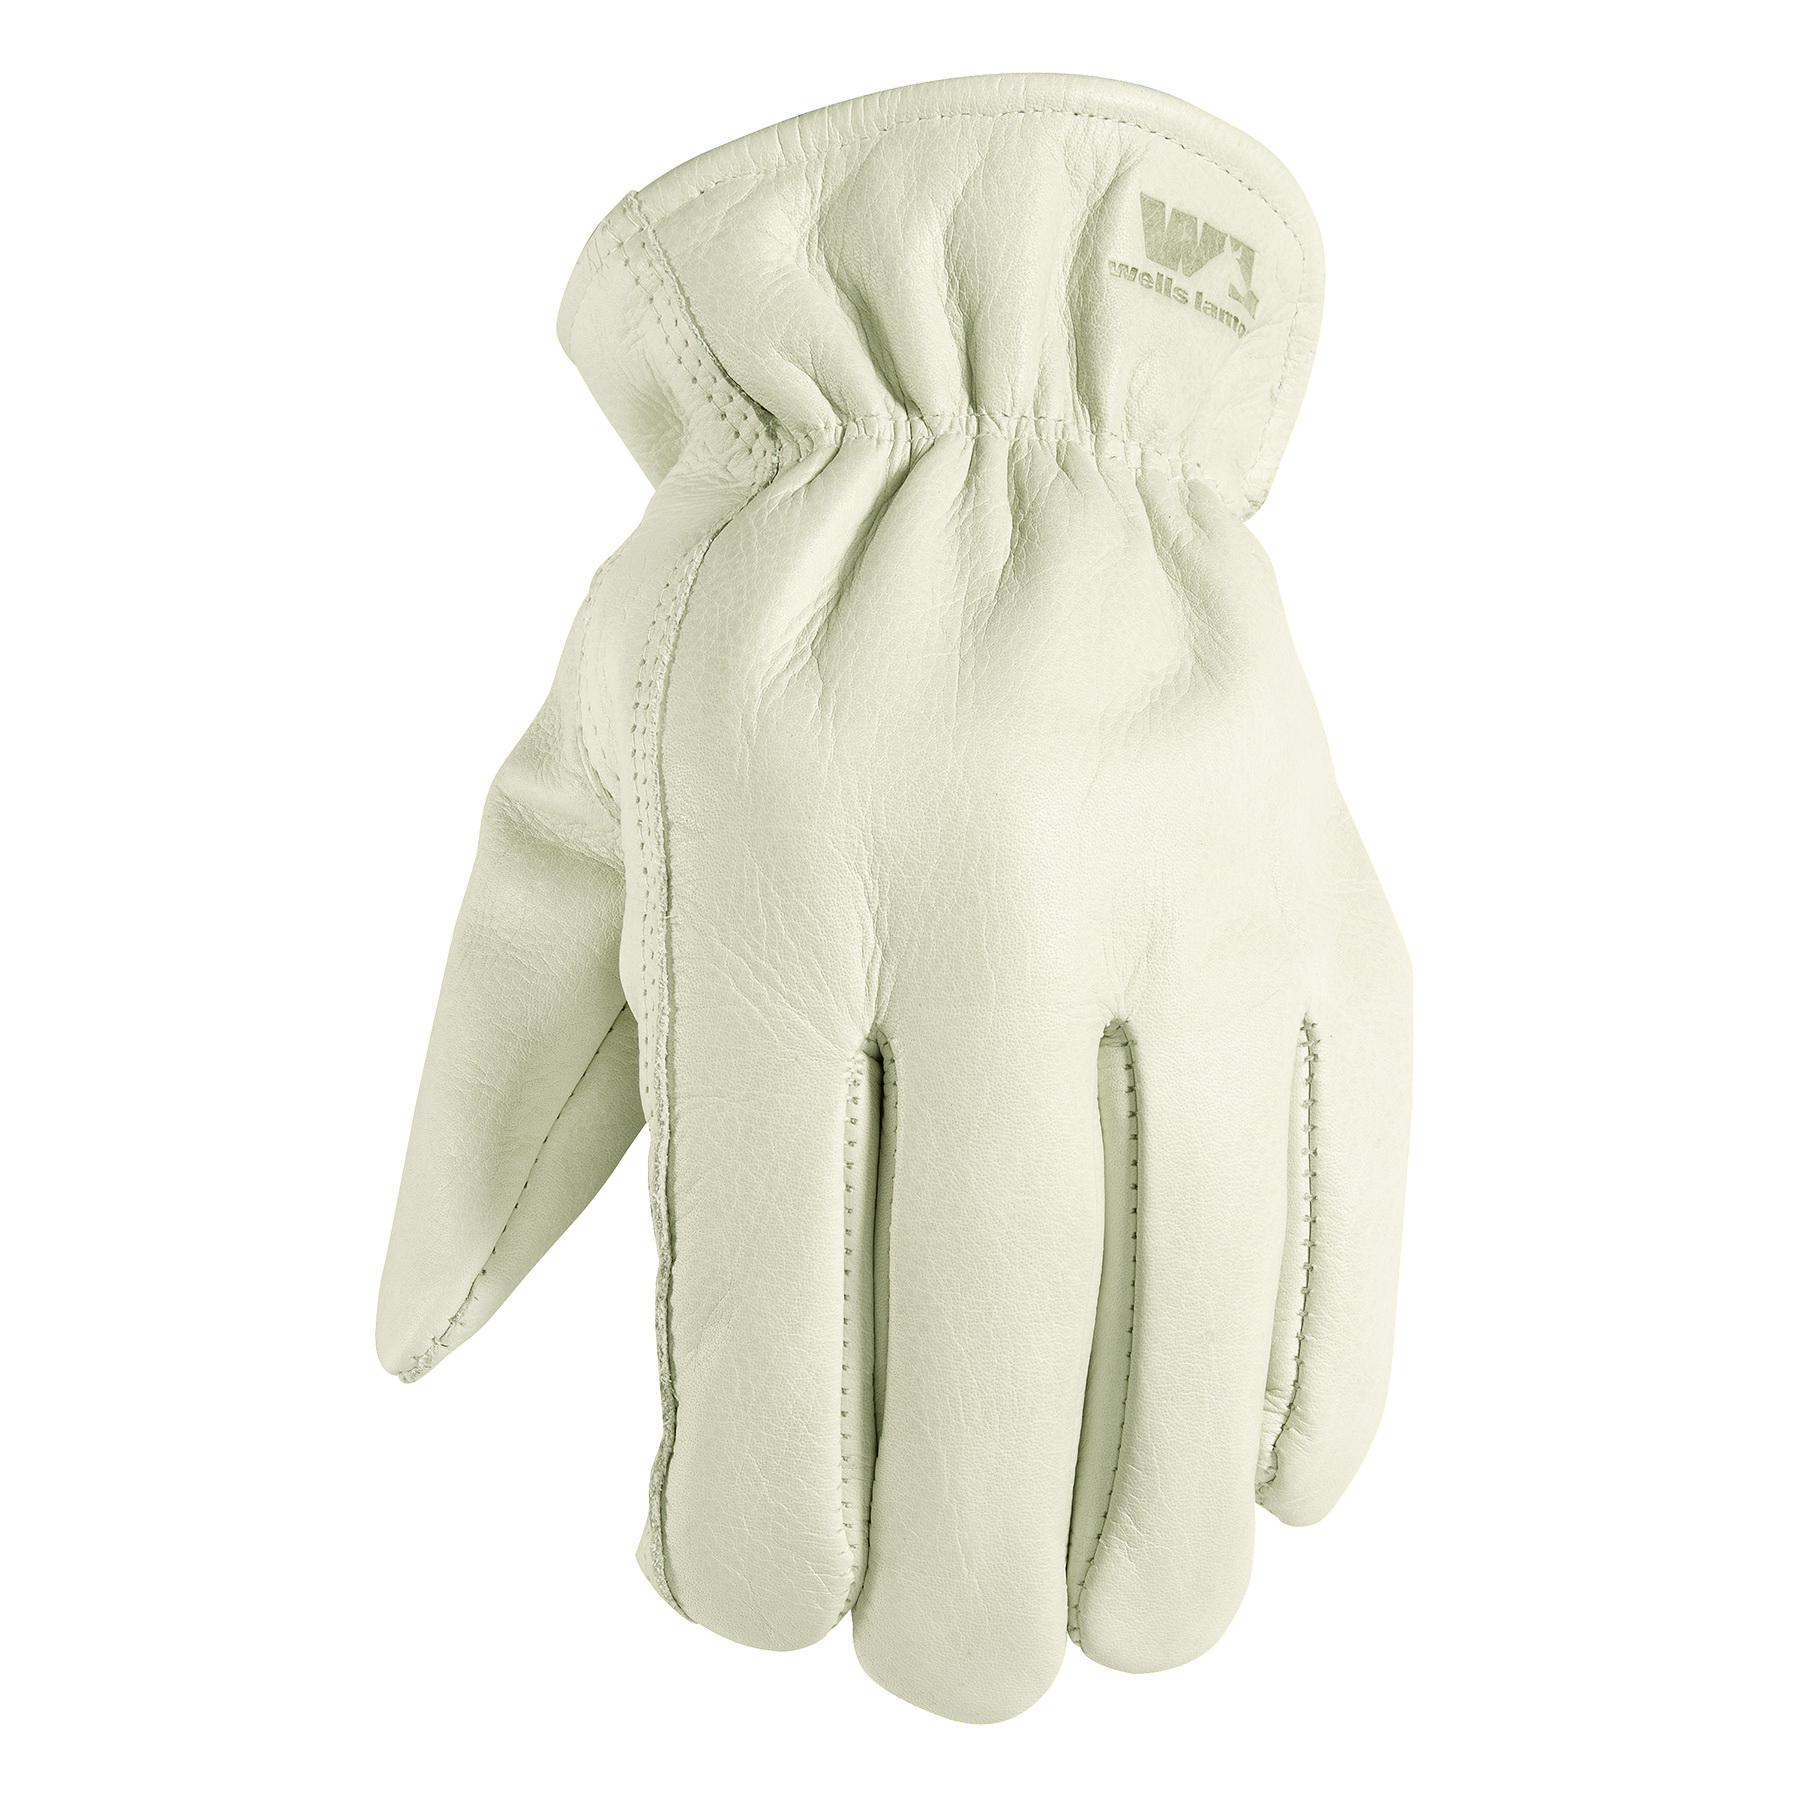 1171XL Work Gloves, Men's, XL, 10 to 10-1/2 in L, Keystone Thumb, Elastic Cuff, Cowhide Leather, White